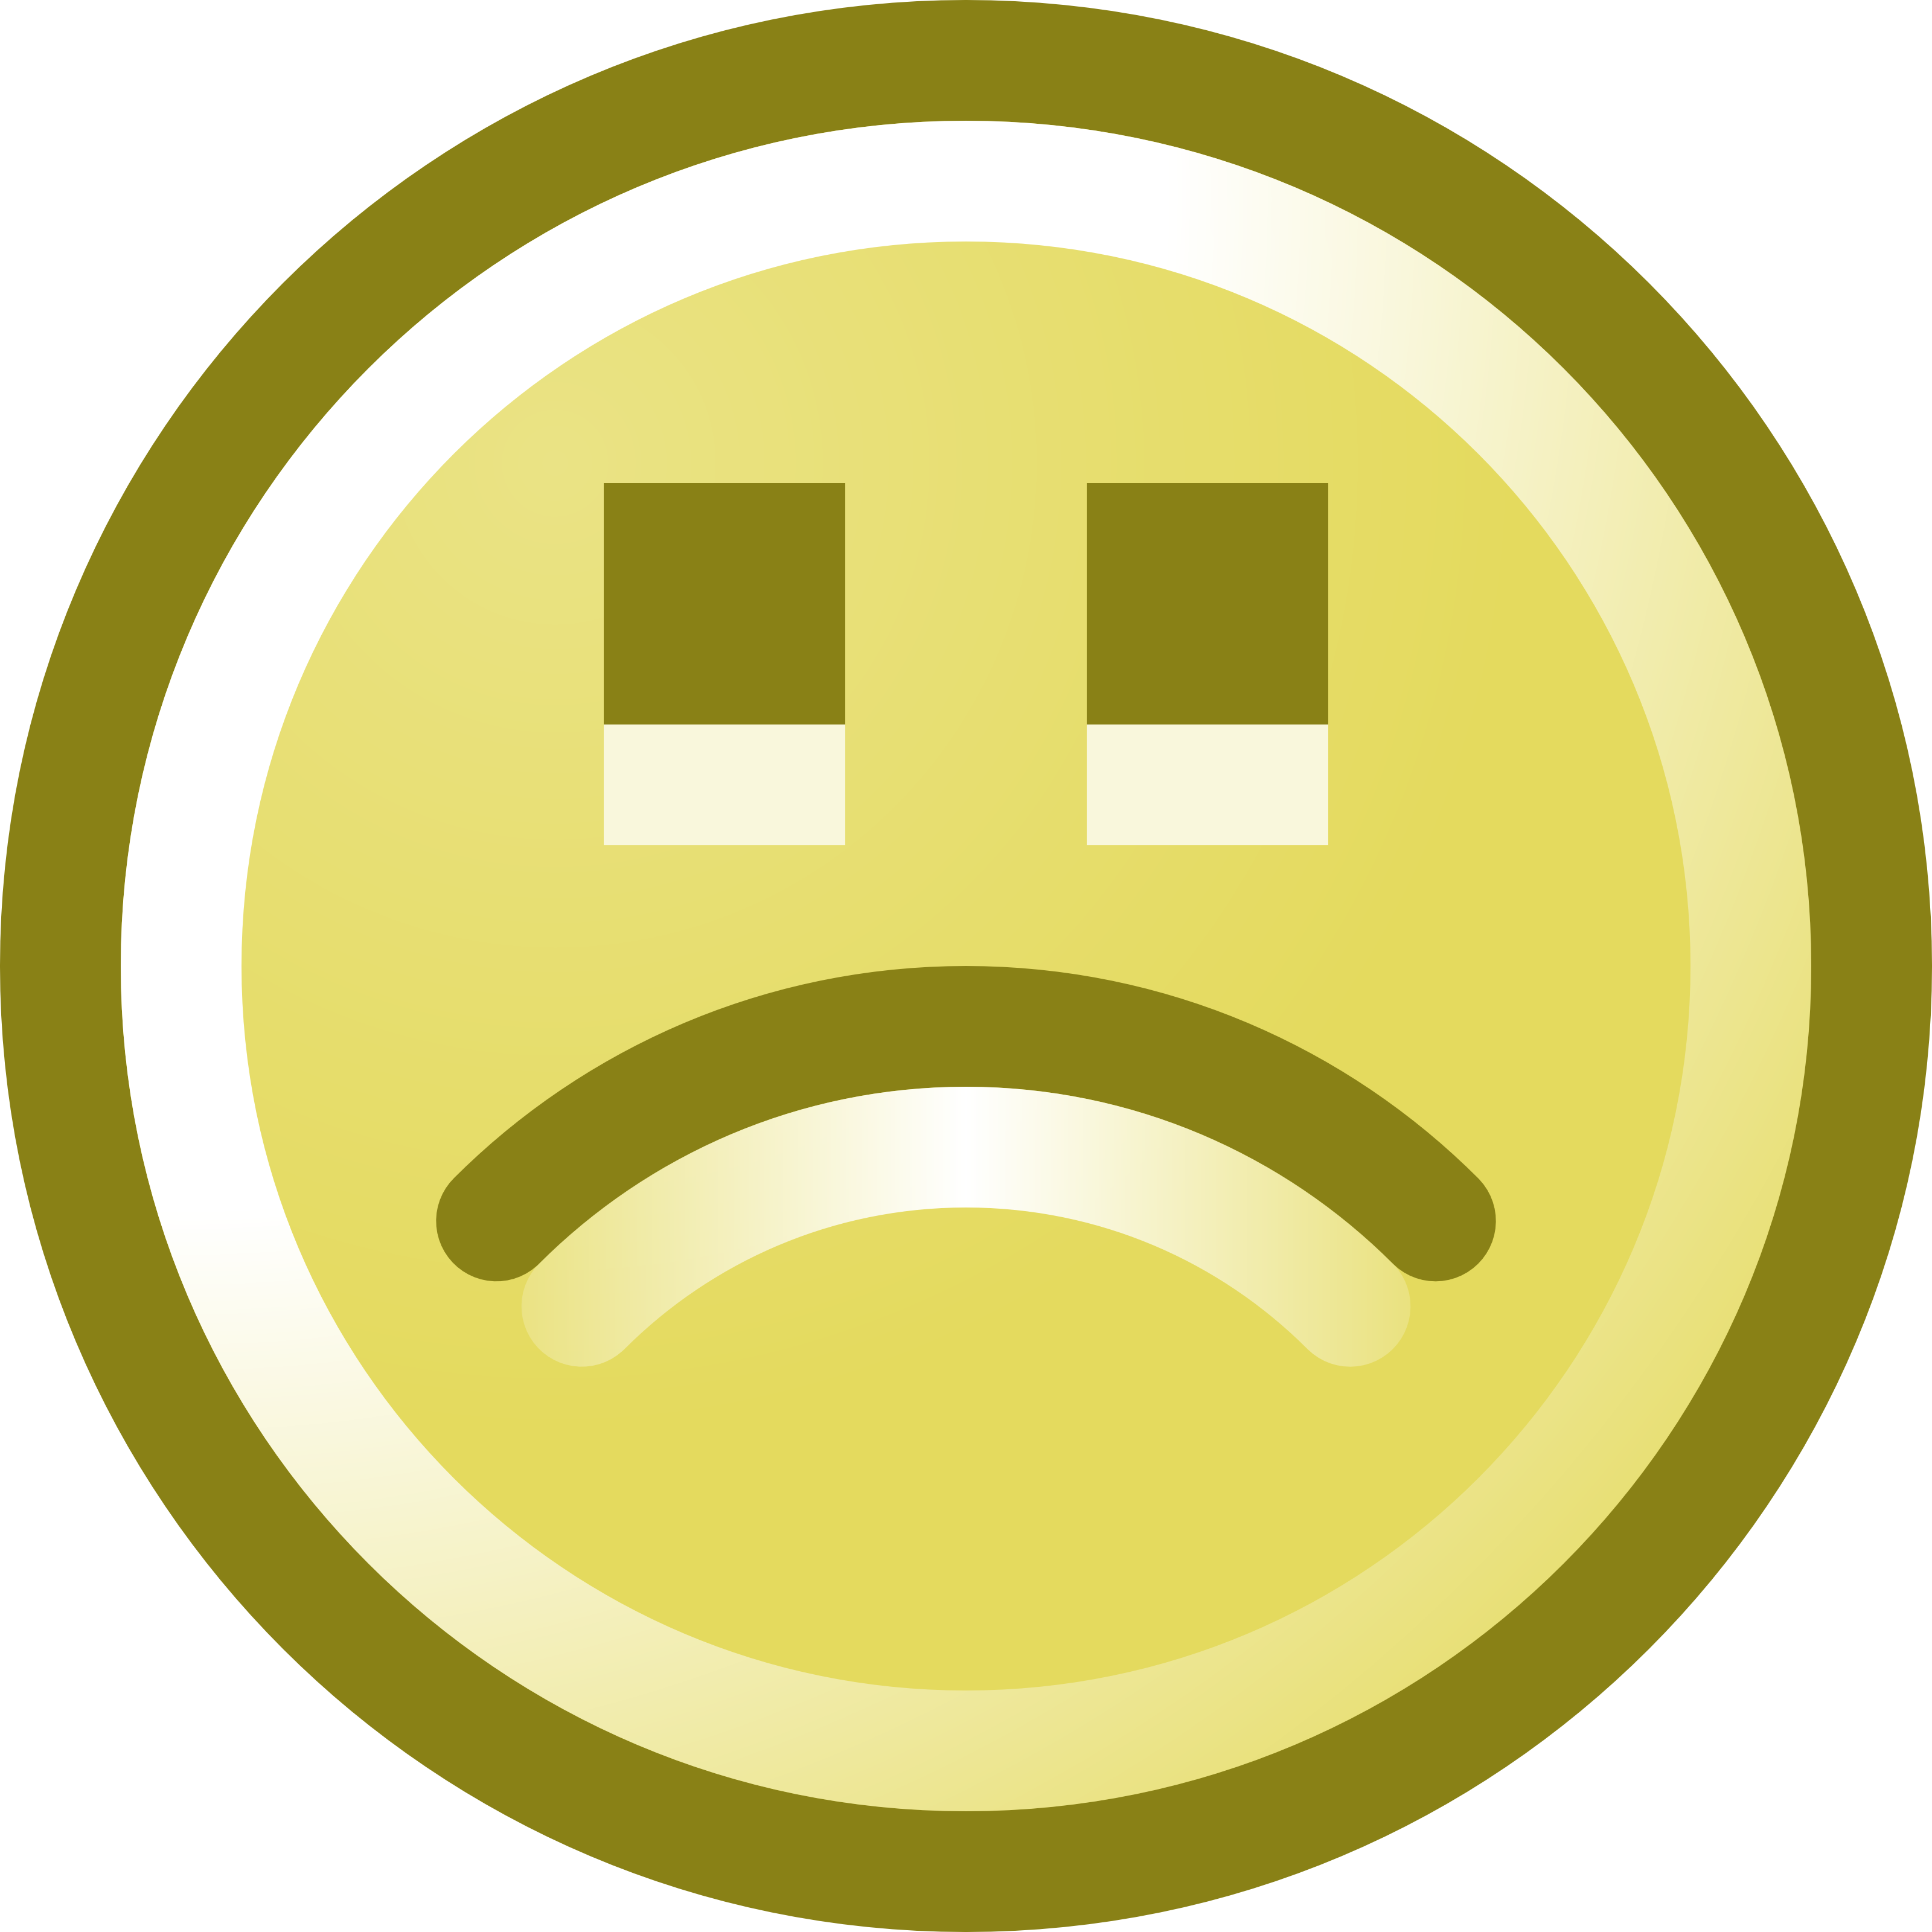 32-Free-Frowning-Smiley-Face-Clip-Art-Illustration : Indyraceplace.